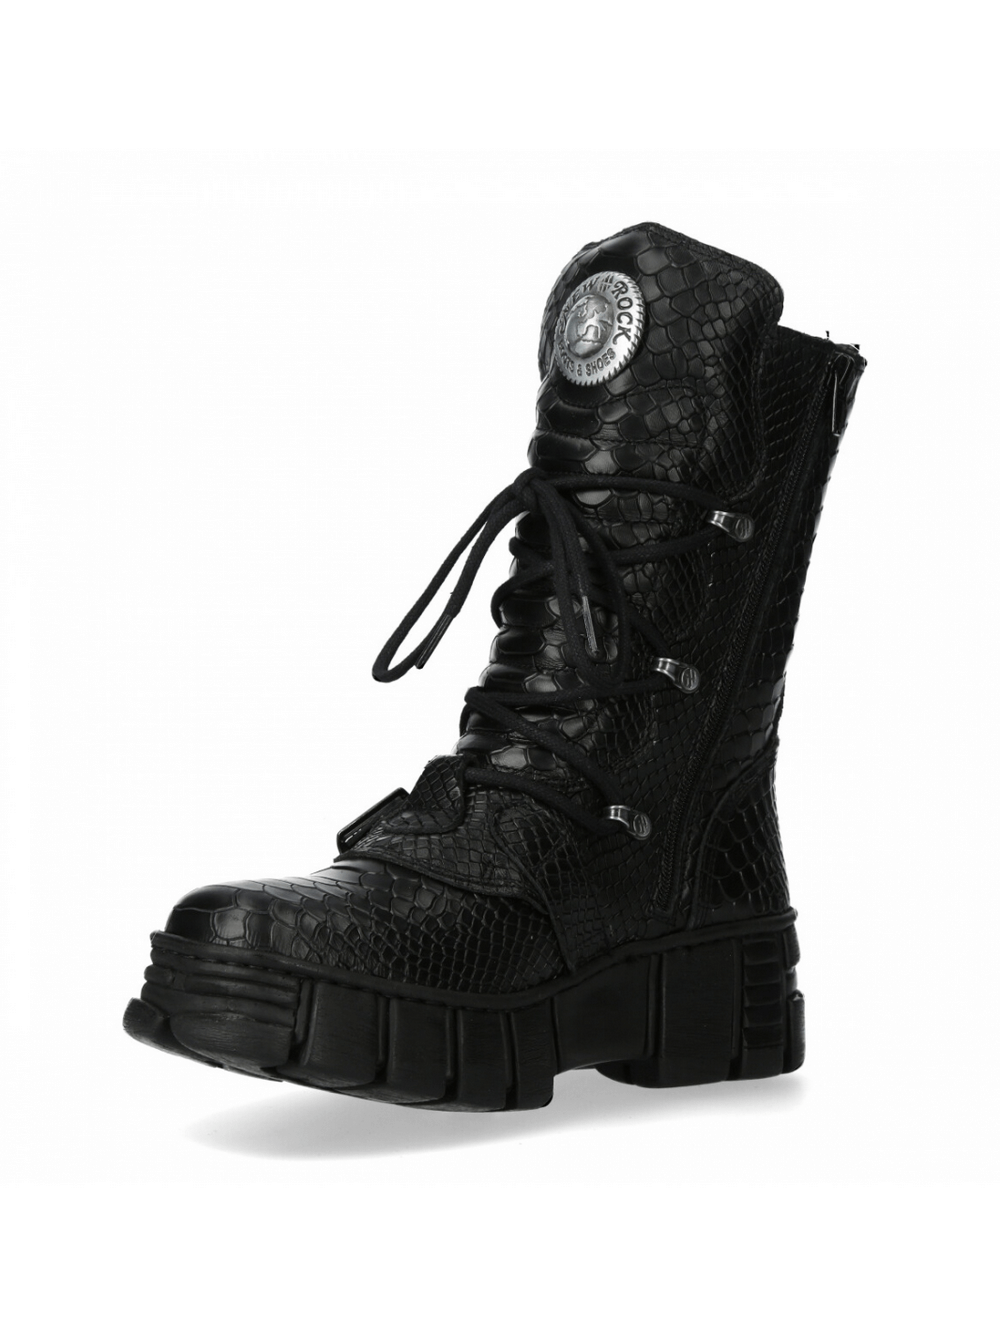 NEW ROCK Mid-Calf Boots with Gothic and Punk Elements